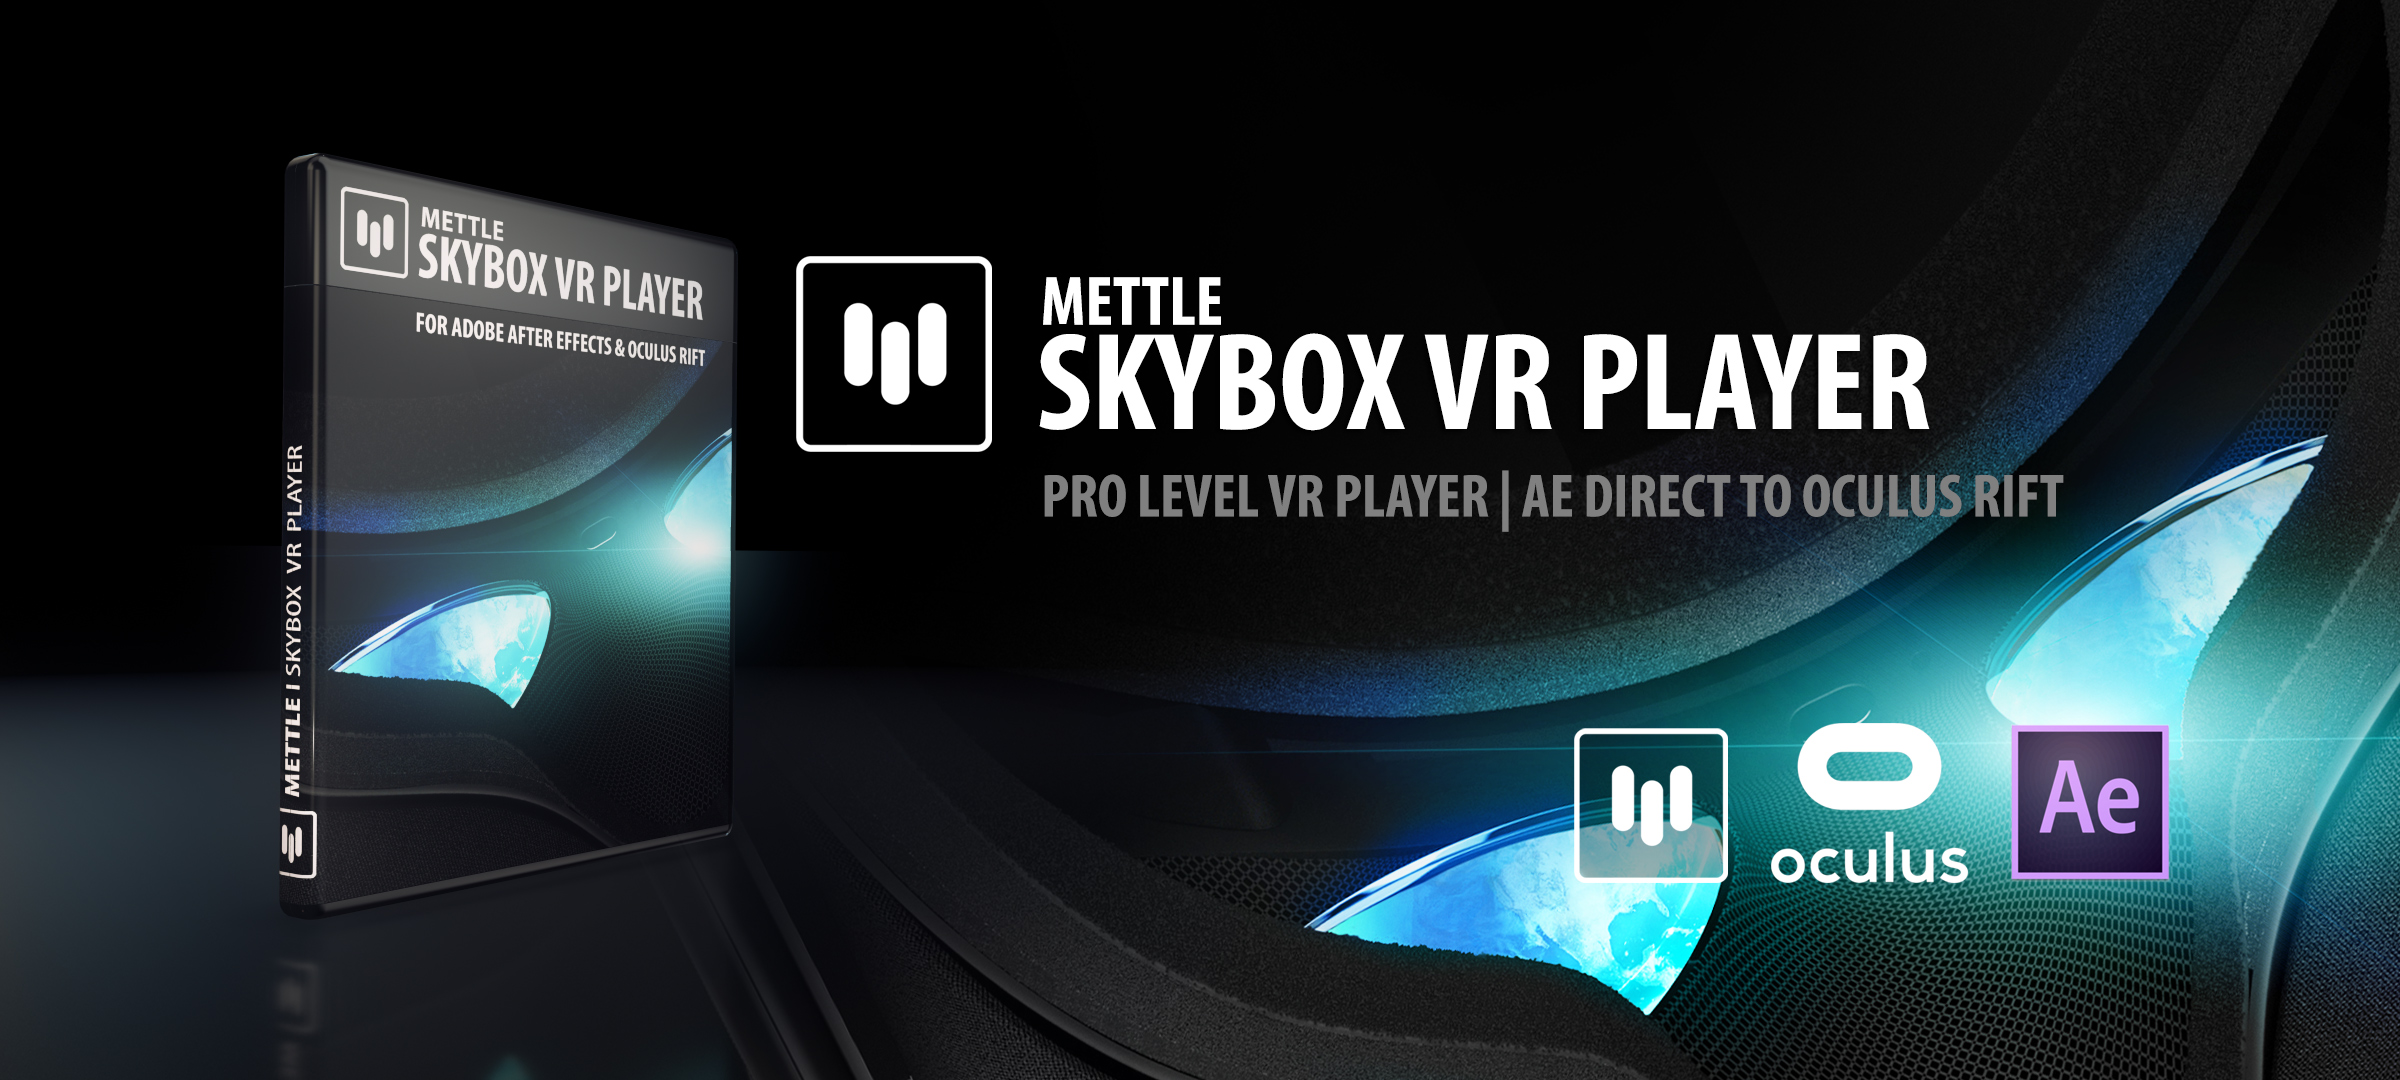 Mettle SkyBox VR Player promo